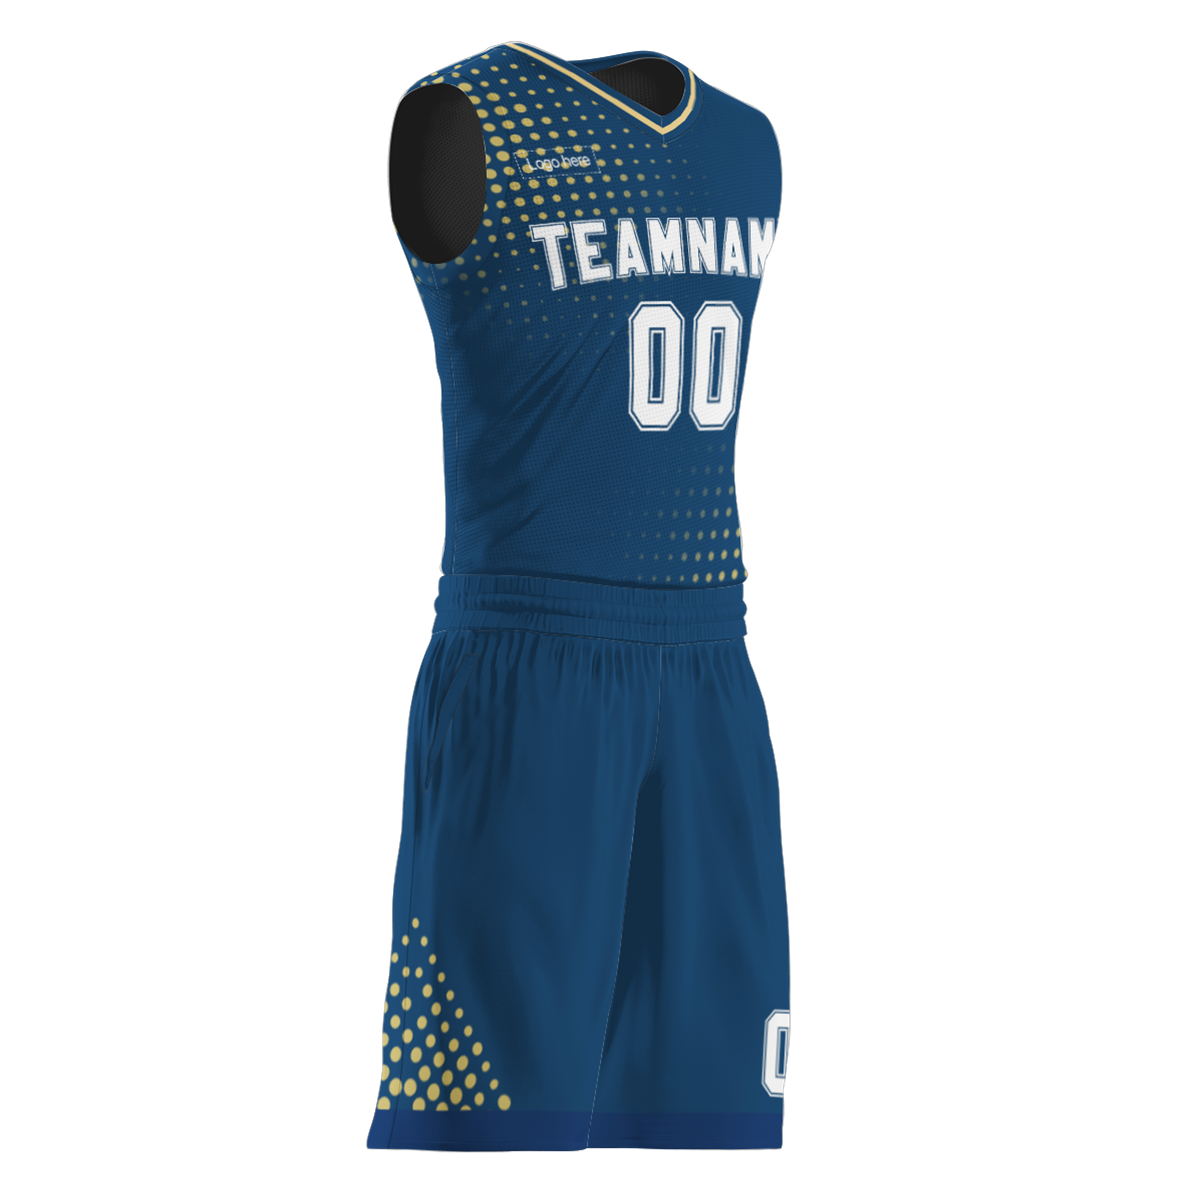 Professional Customized Basketball Jersey Uniform Sets Print on Demand Quick Dry Breathable Basketball Shirt Suits